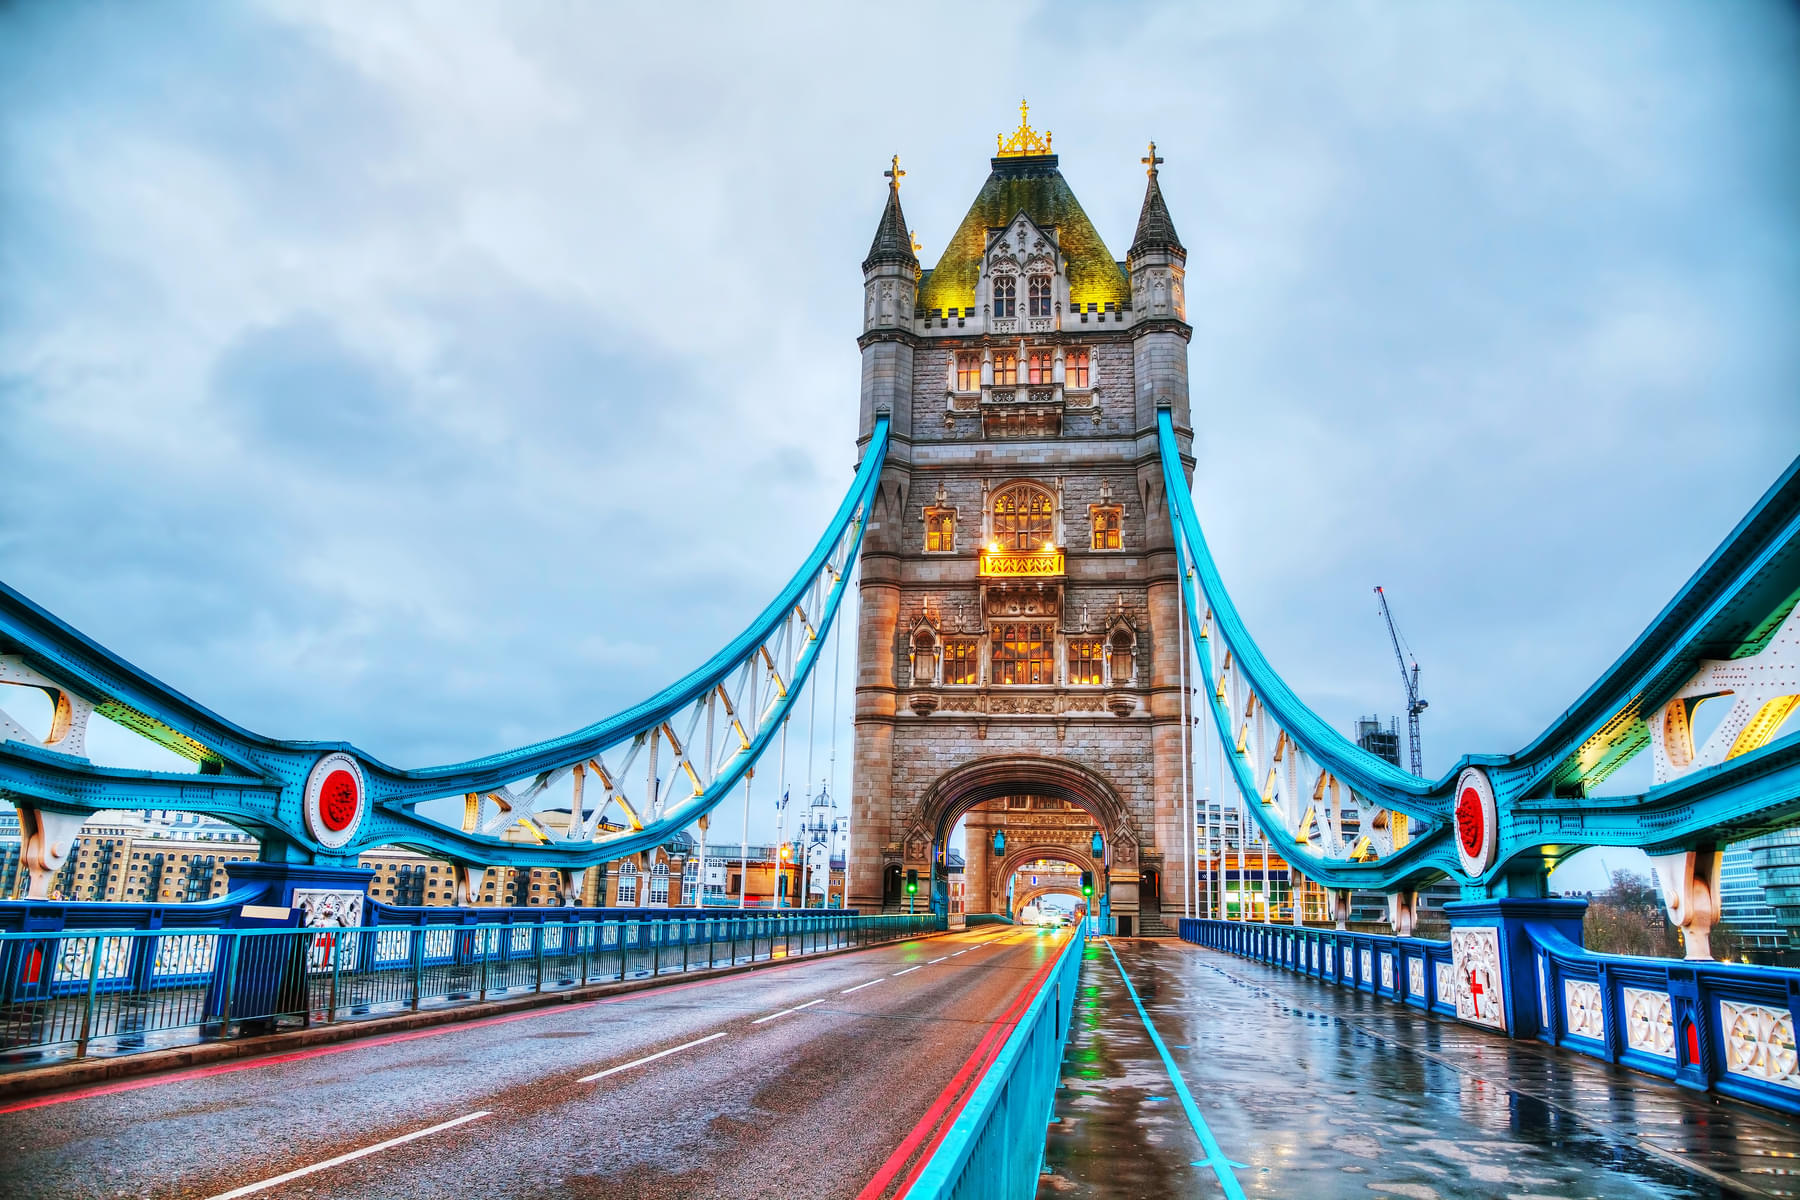 Make this trip most memorable with your loved ones at the Tower Bridge